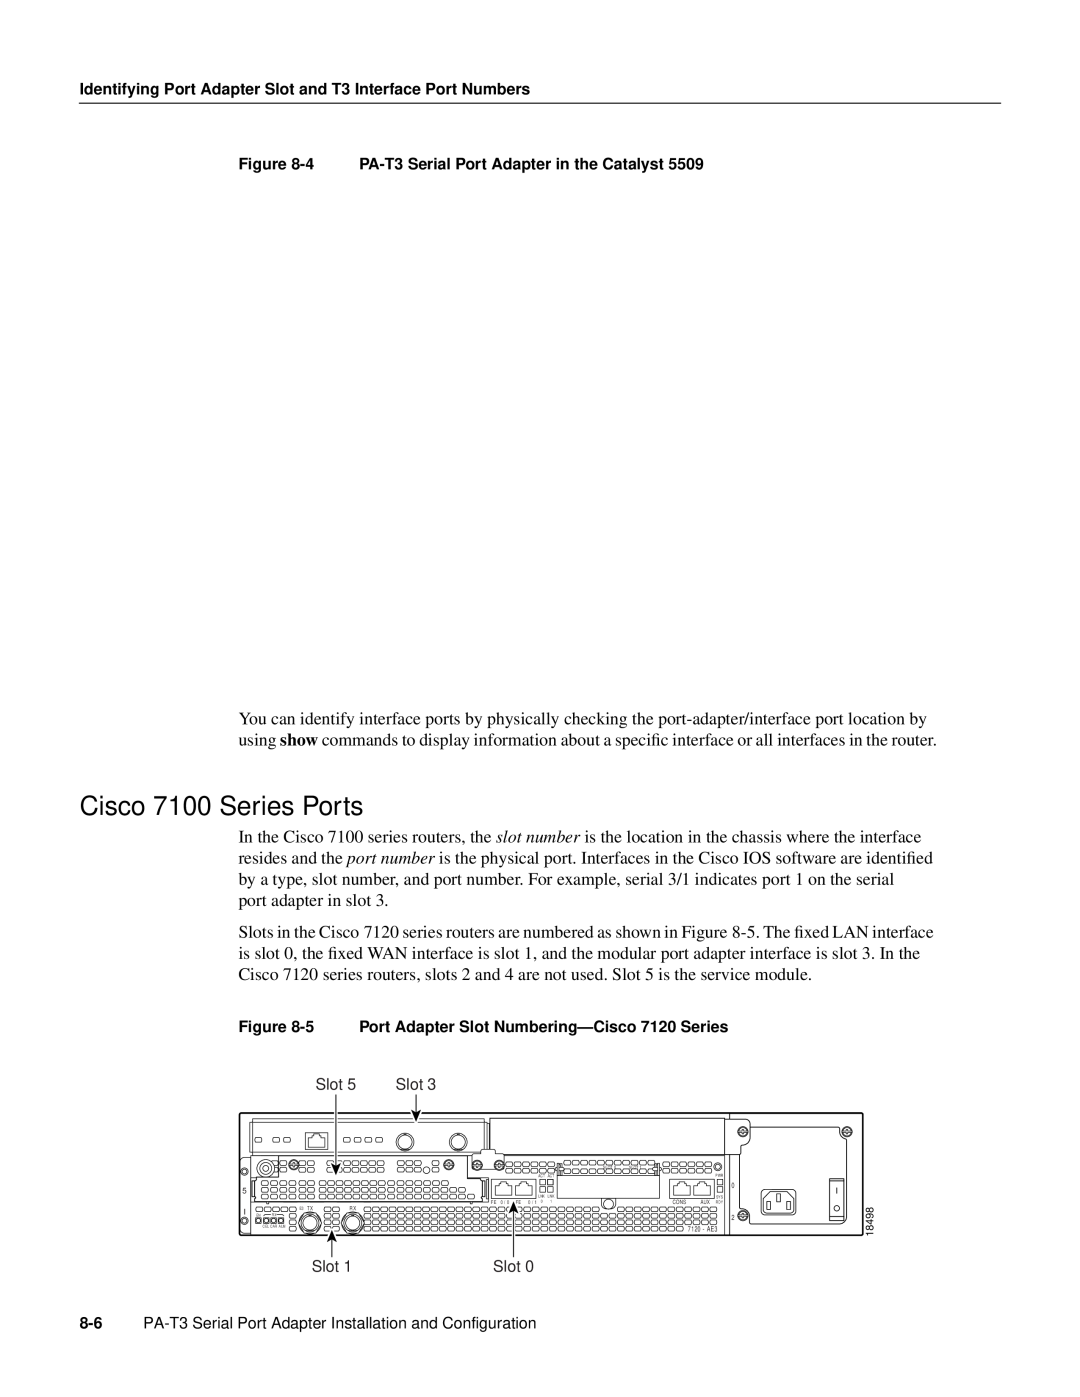 Cisco Systems manual Cisco 7100 Series Ports, PA-T3 Serial Port Adapter Installation and Configuration 